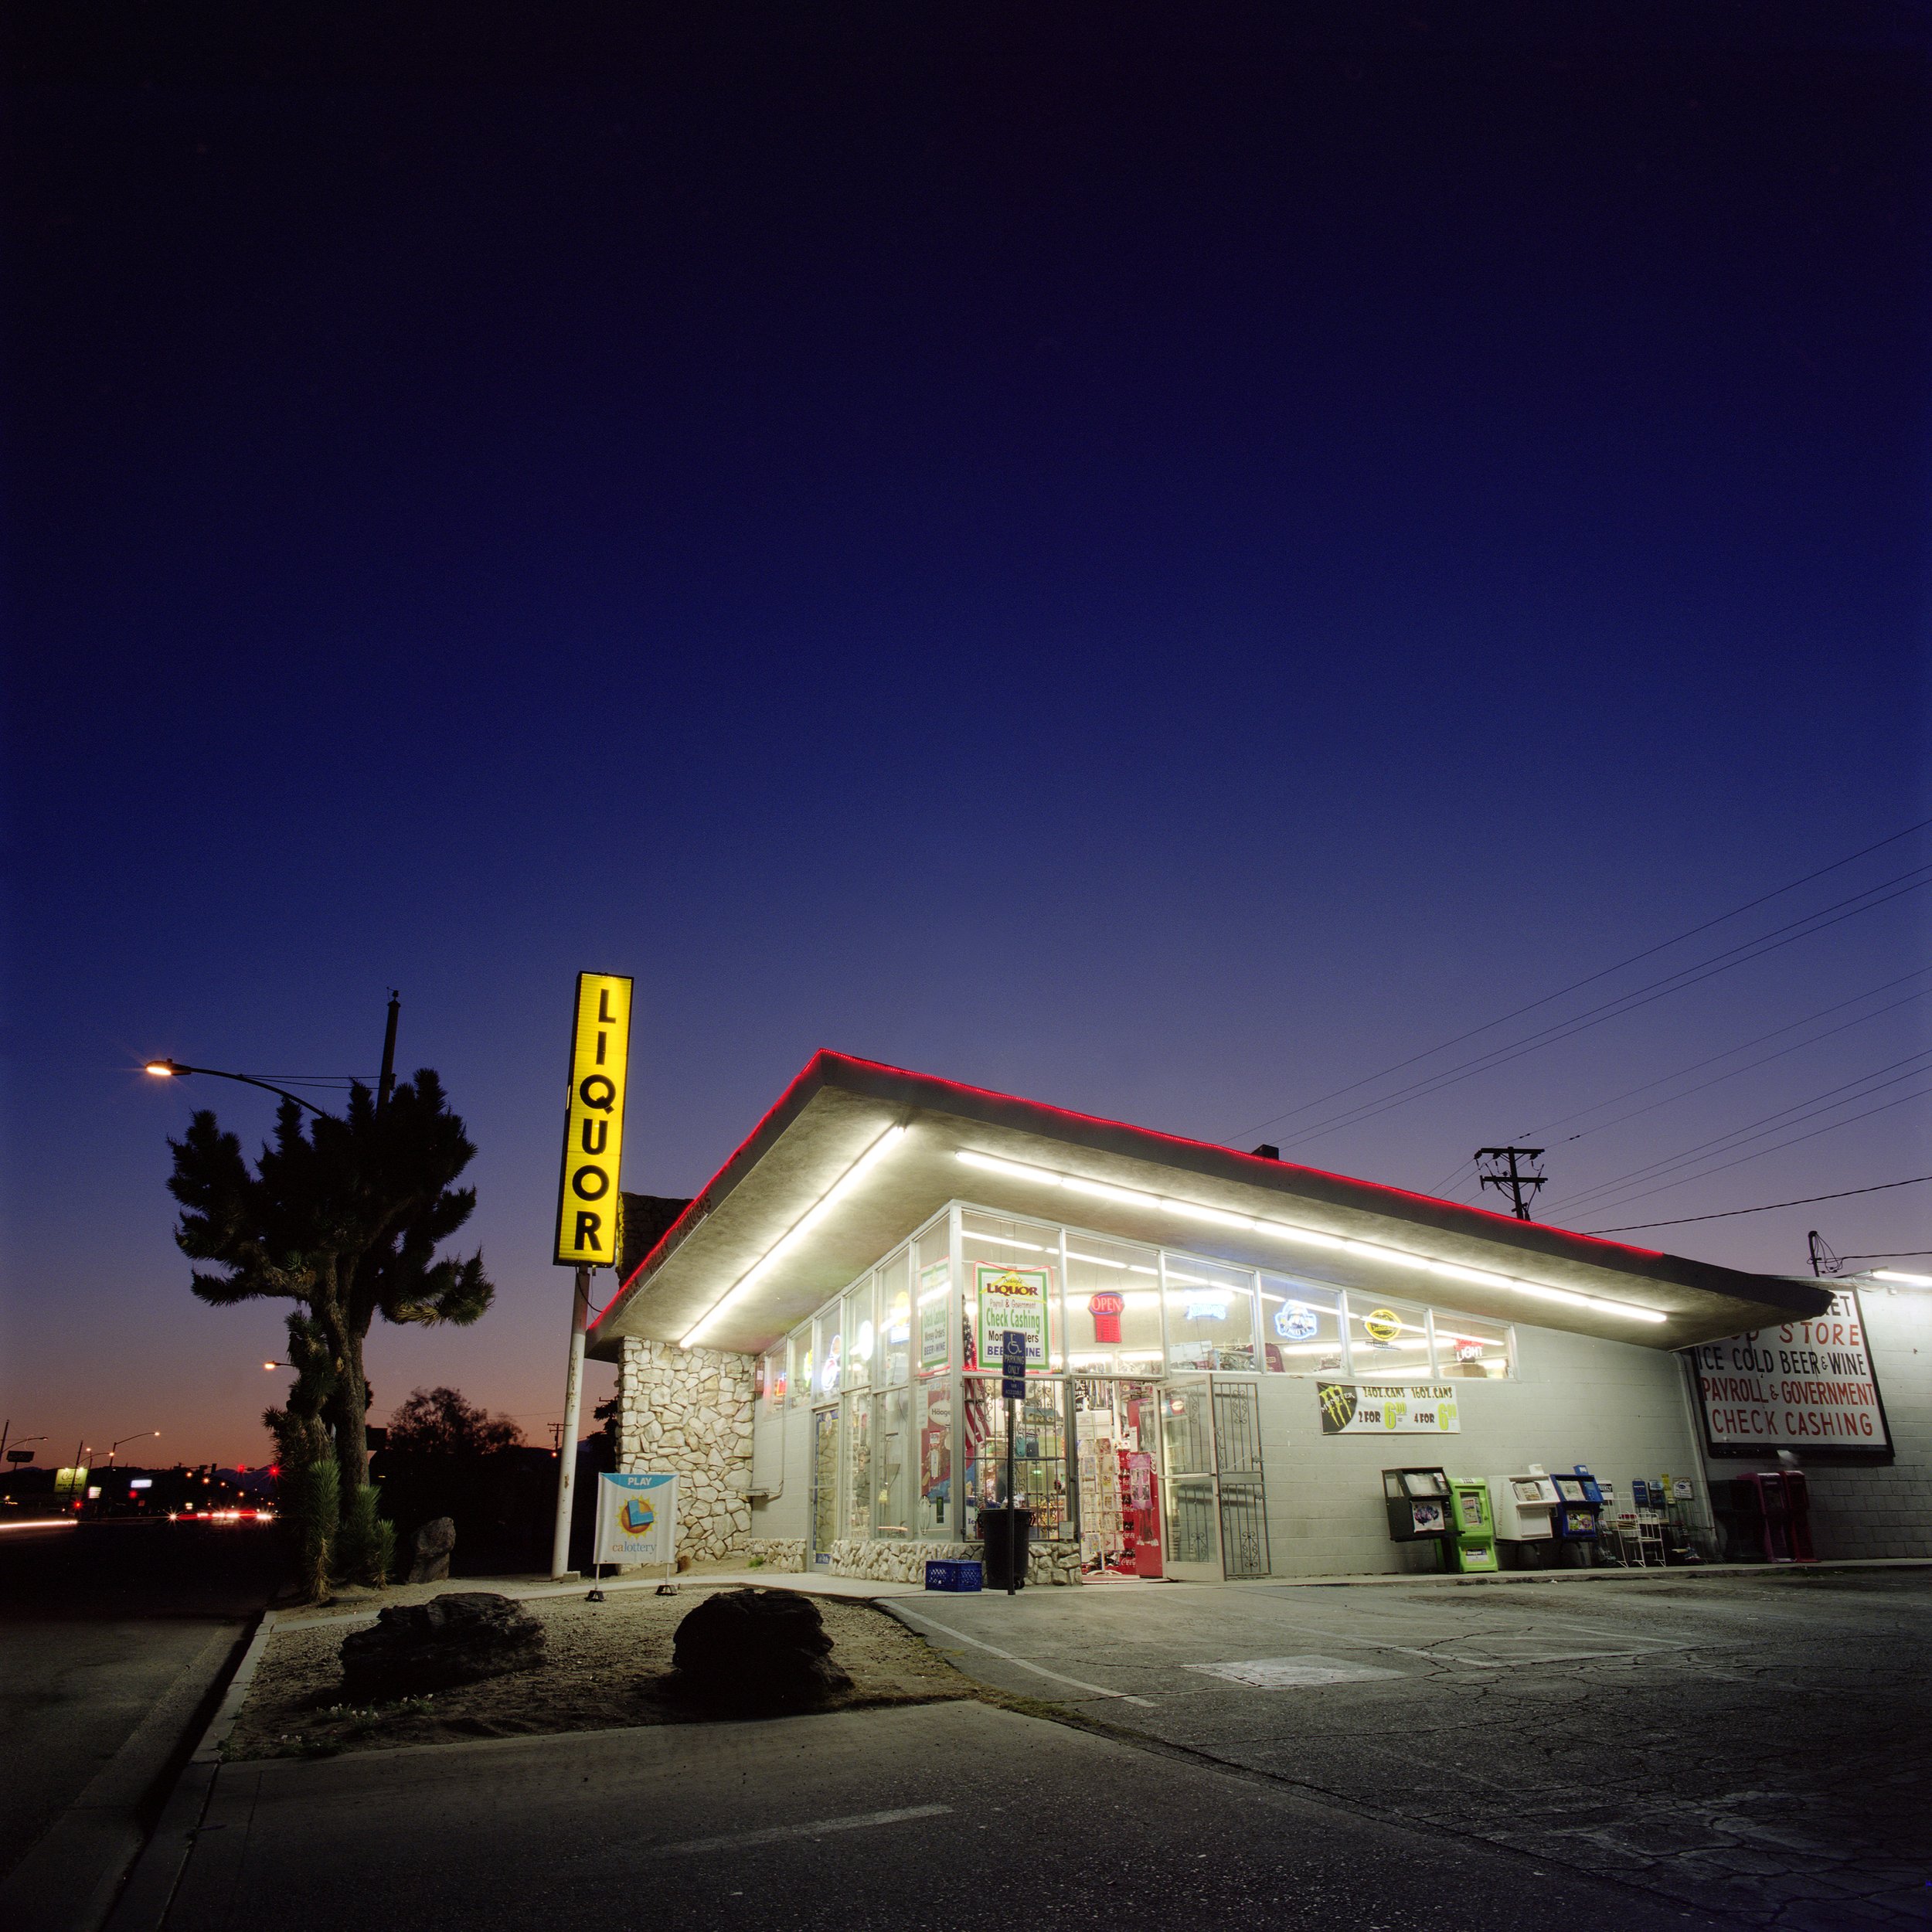   Liquor Store. Yucca Valley. August 13, 2009  